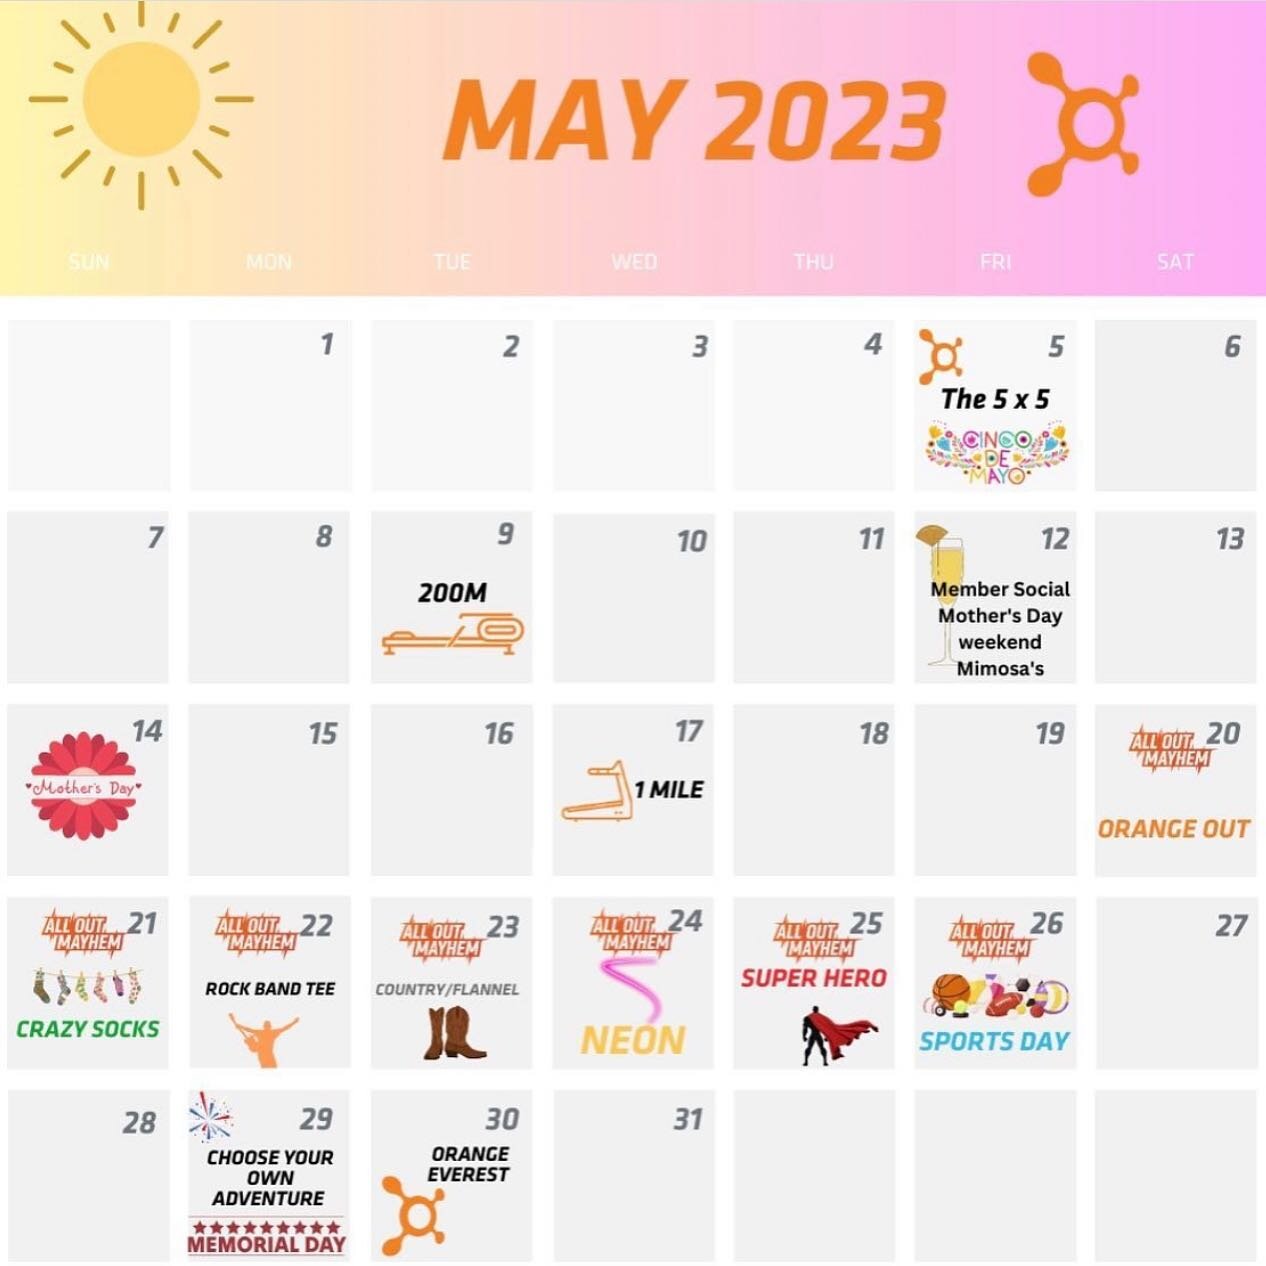 Come join the fun this month at @orangetheorynorman in Brookhaven Village. They know how to get keep you motivated and feeling great! 

#shopnorman #brookhavenvillage